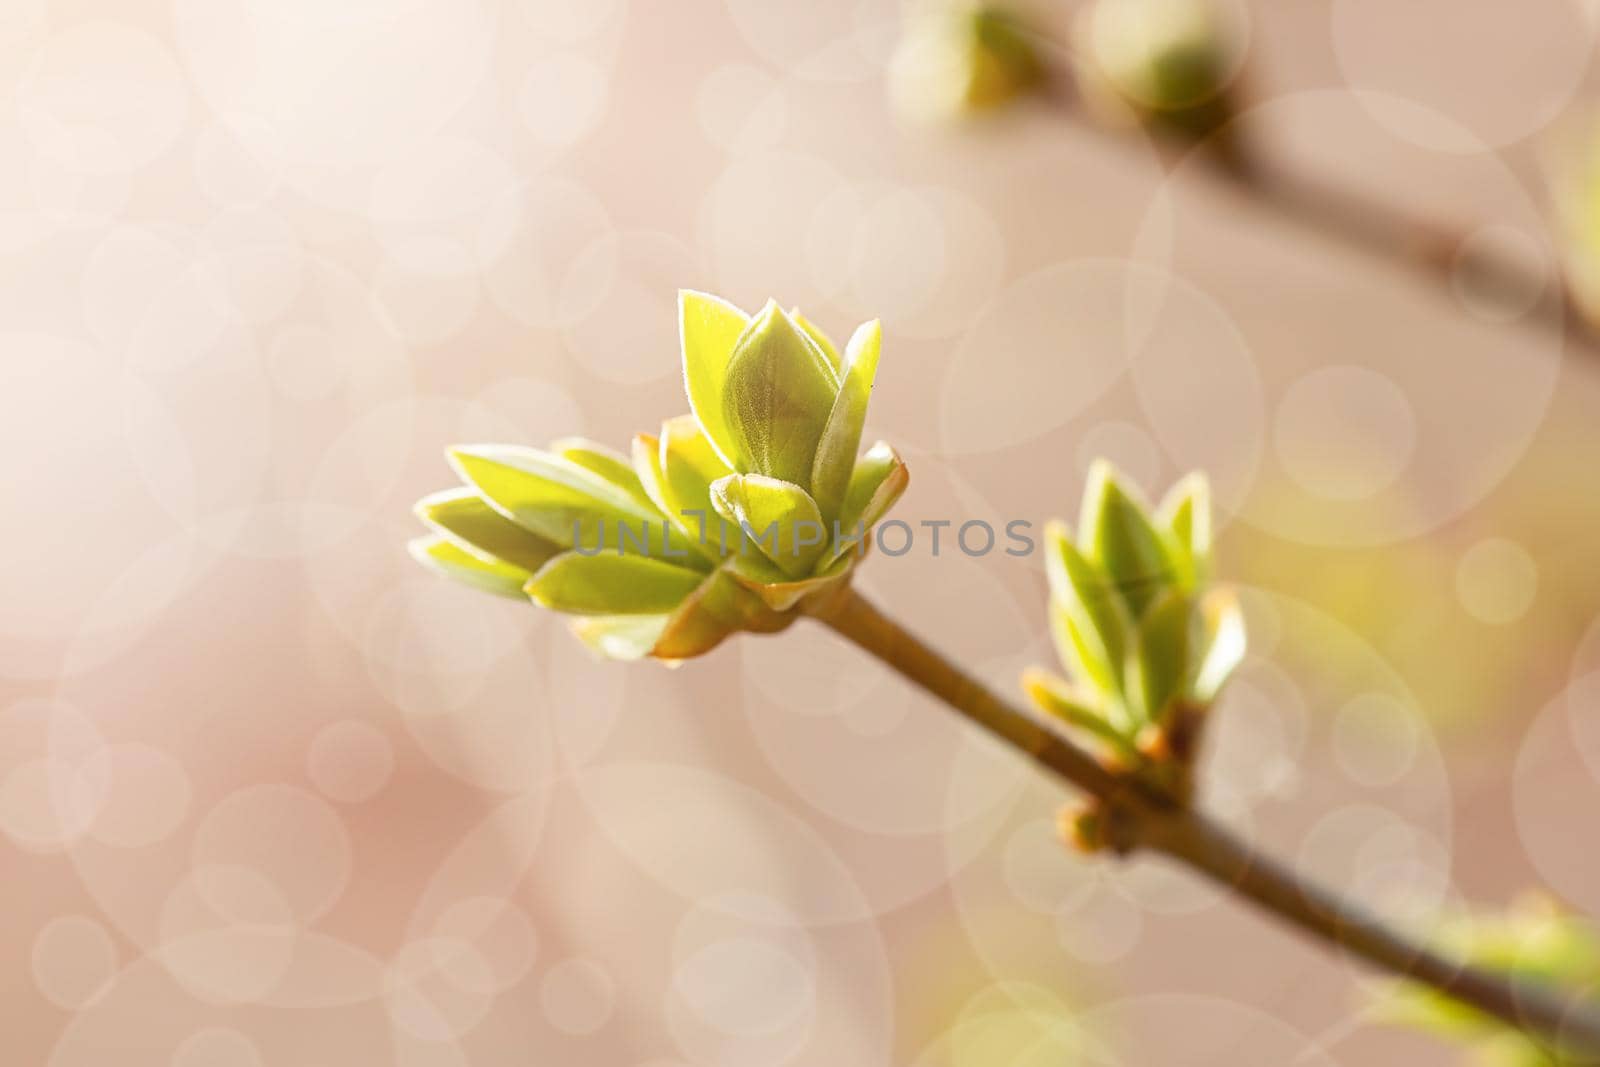 Lilac buds on a branch in early spring with sun exposure horizontal format by galinasharapova